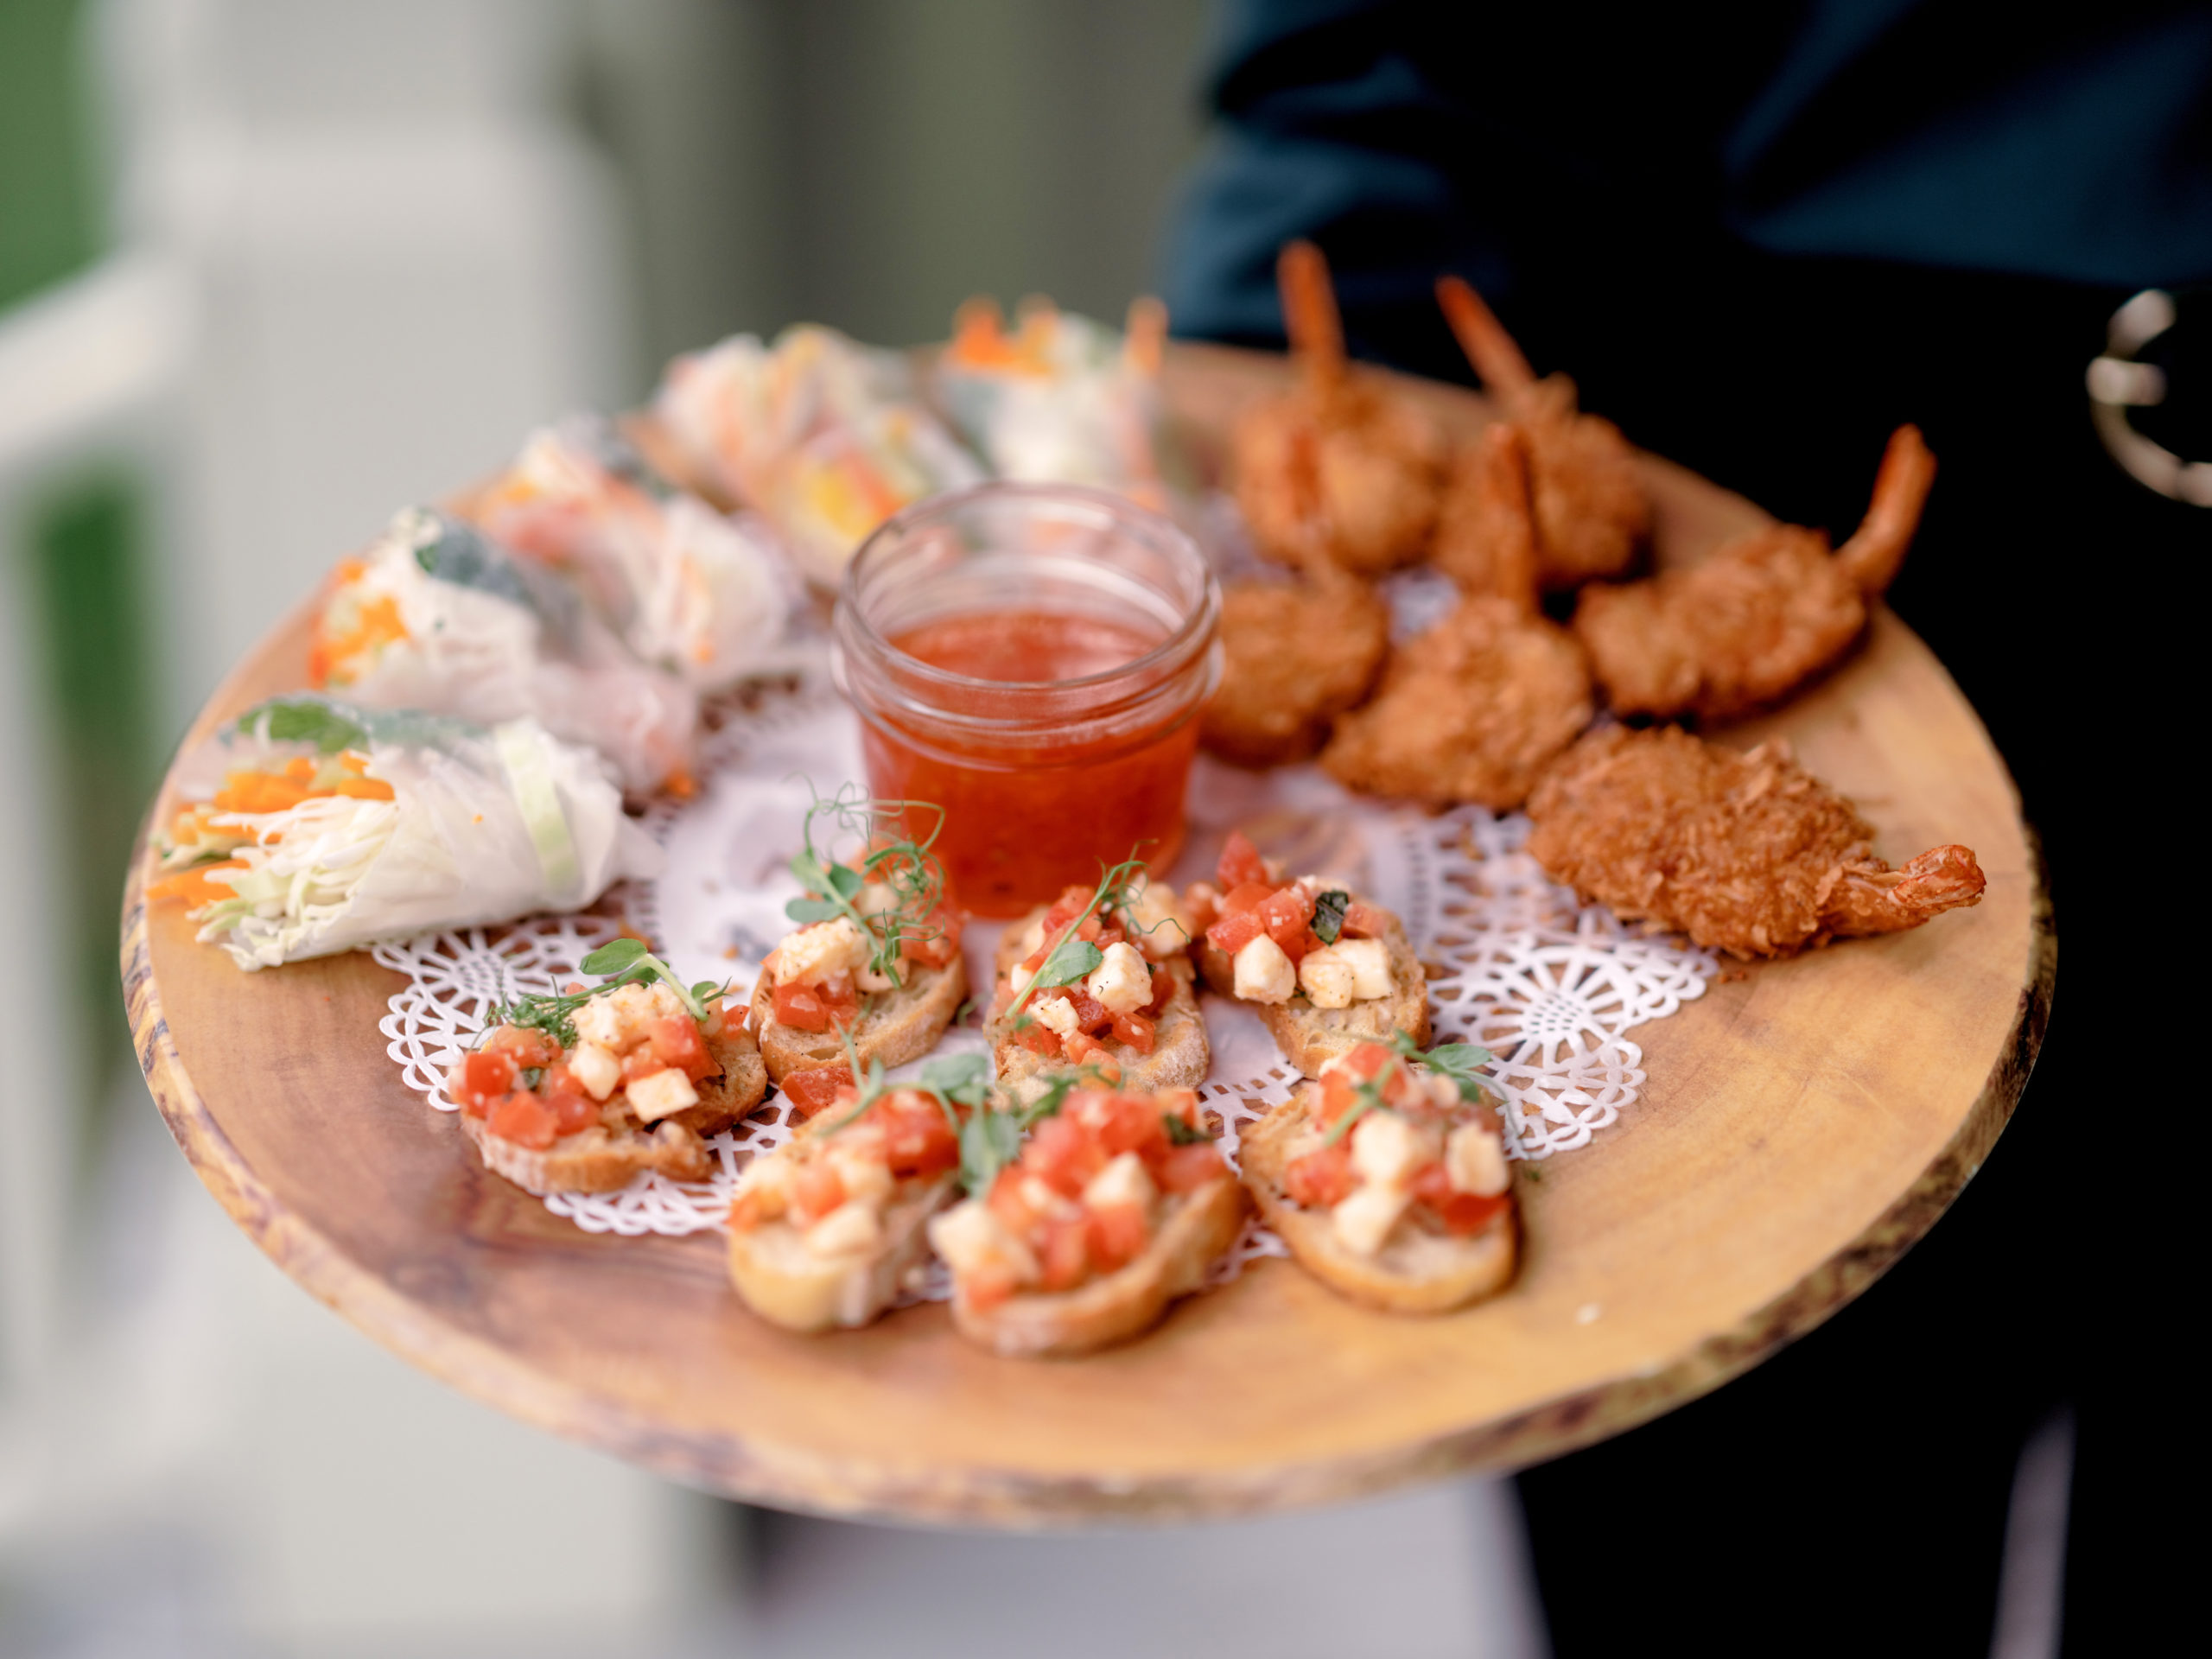 A tray of appetizers at the wedding reception in The Ausable Club, New York. Image by Jenny Fu Studio